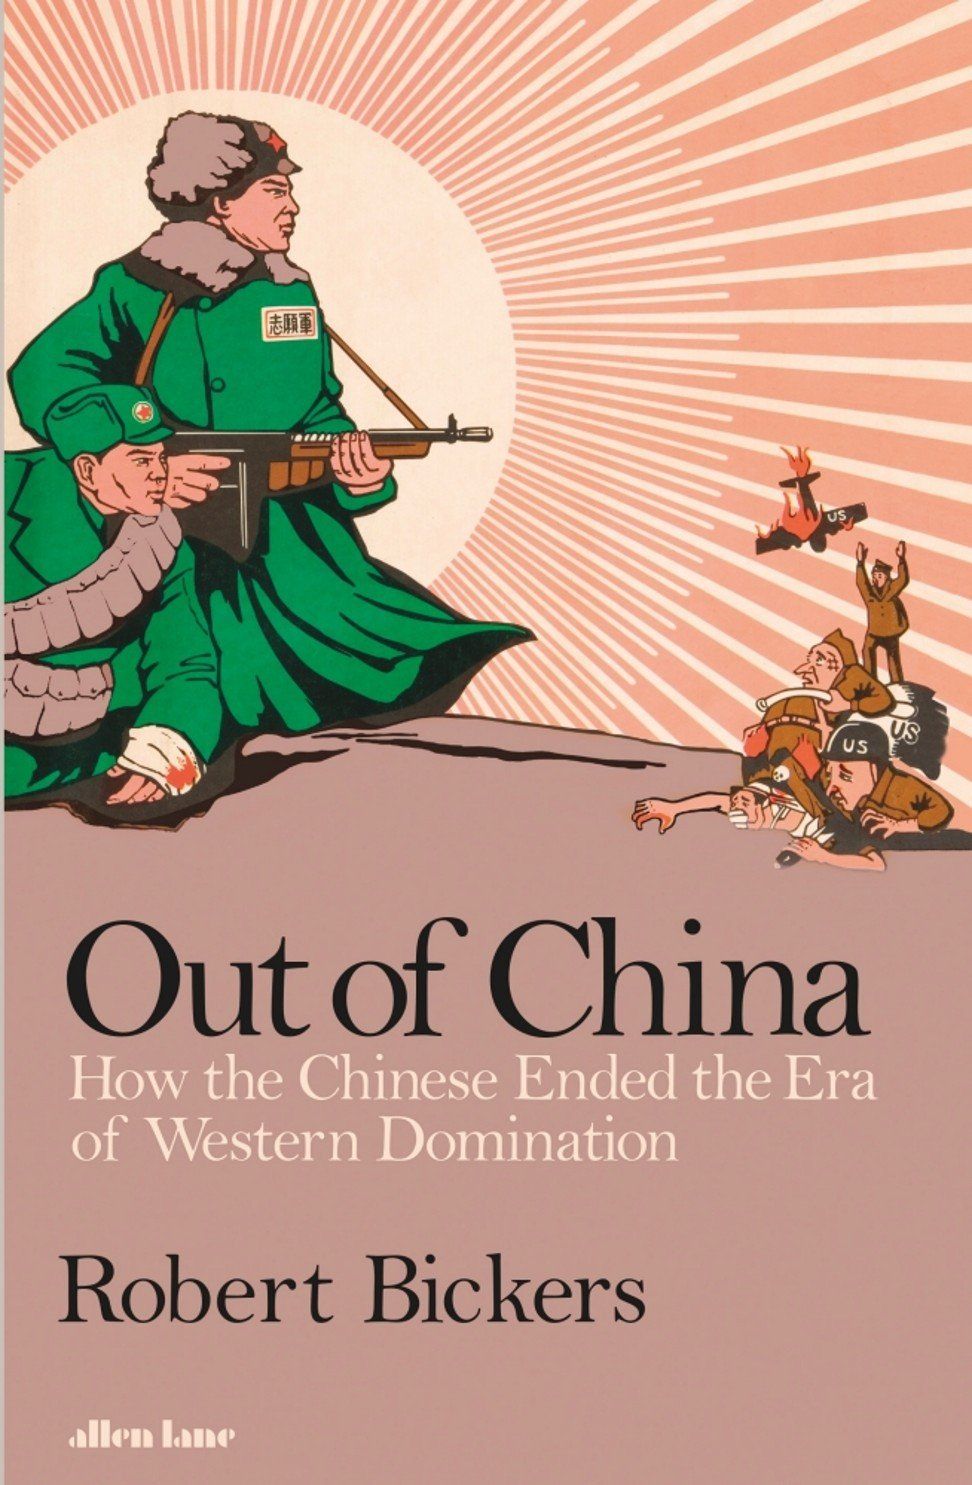 China domination of the 23rd century